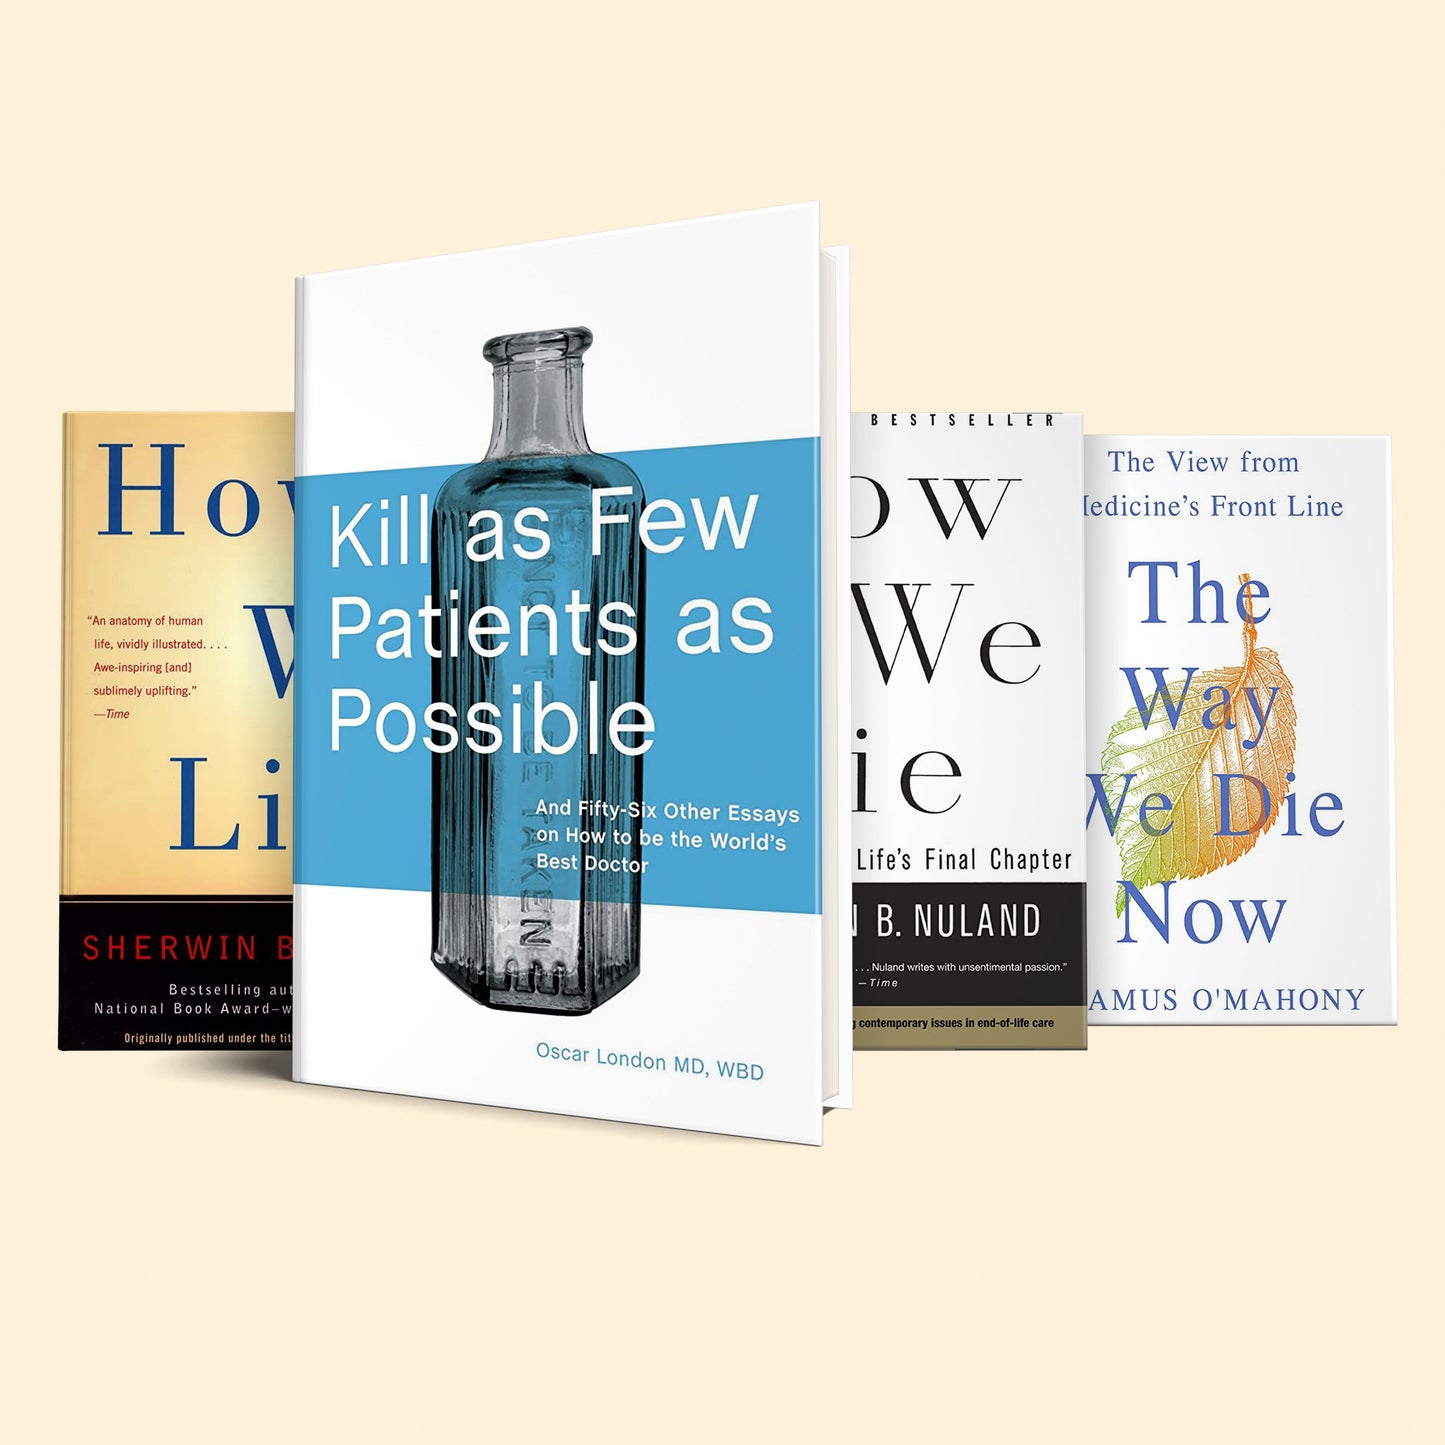 Reflections on Mortality: A Bundle of Books on End-of-Life Care